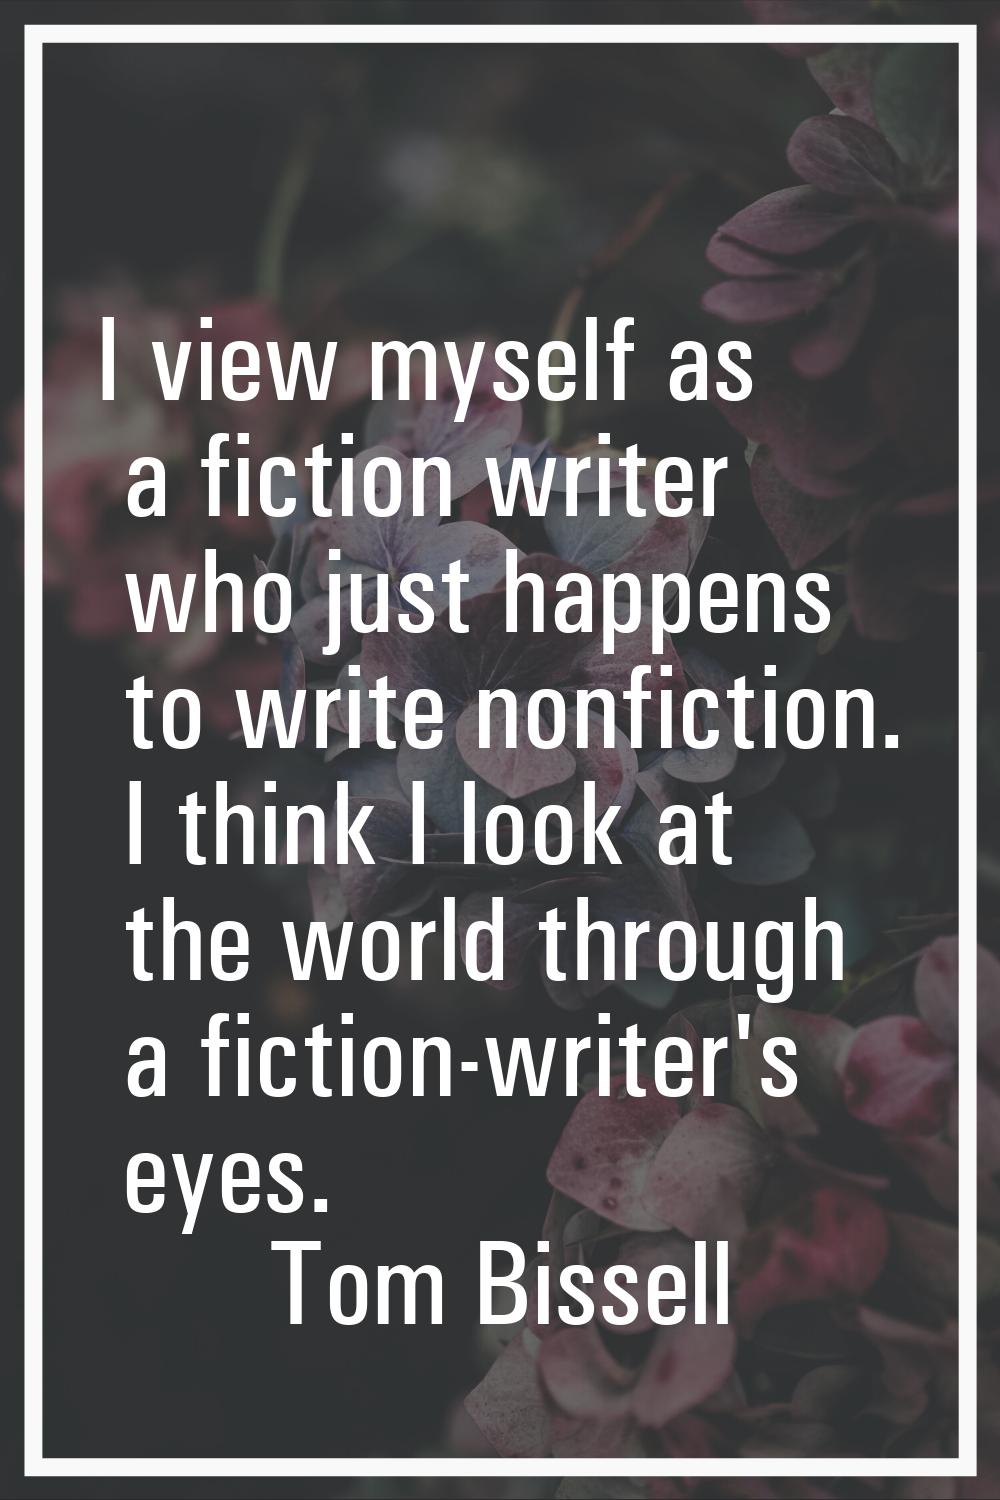 I view myself as a fiction writer who just happens to write nonfiction. I think I look at the world